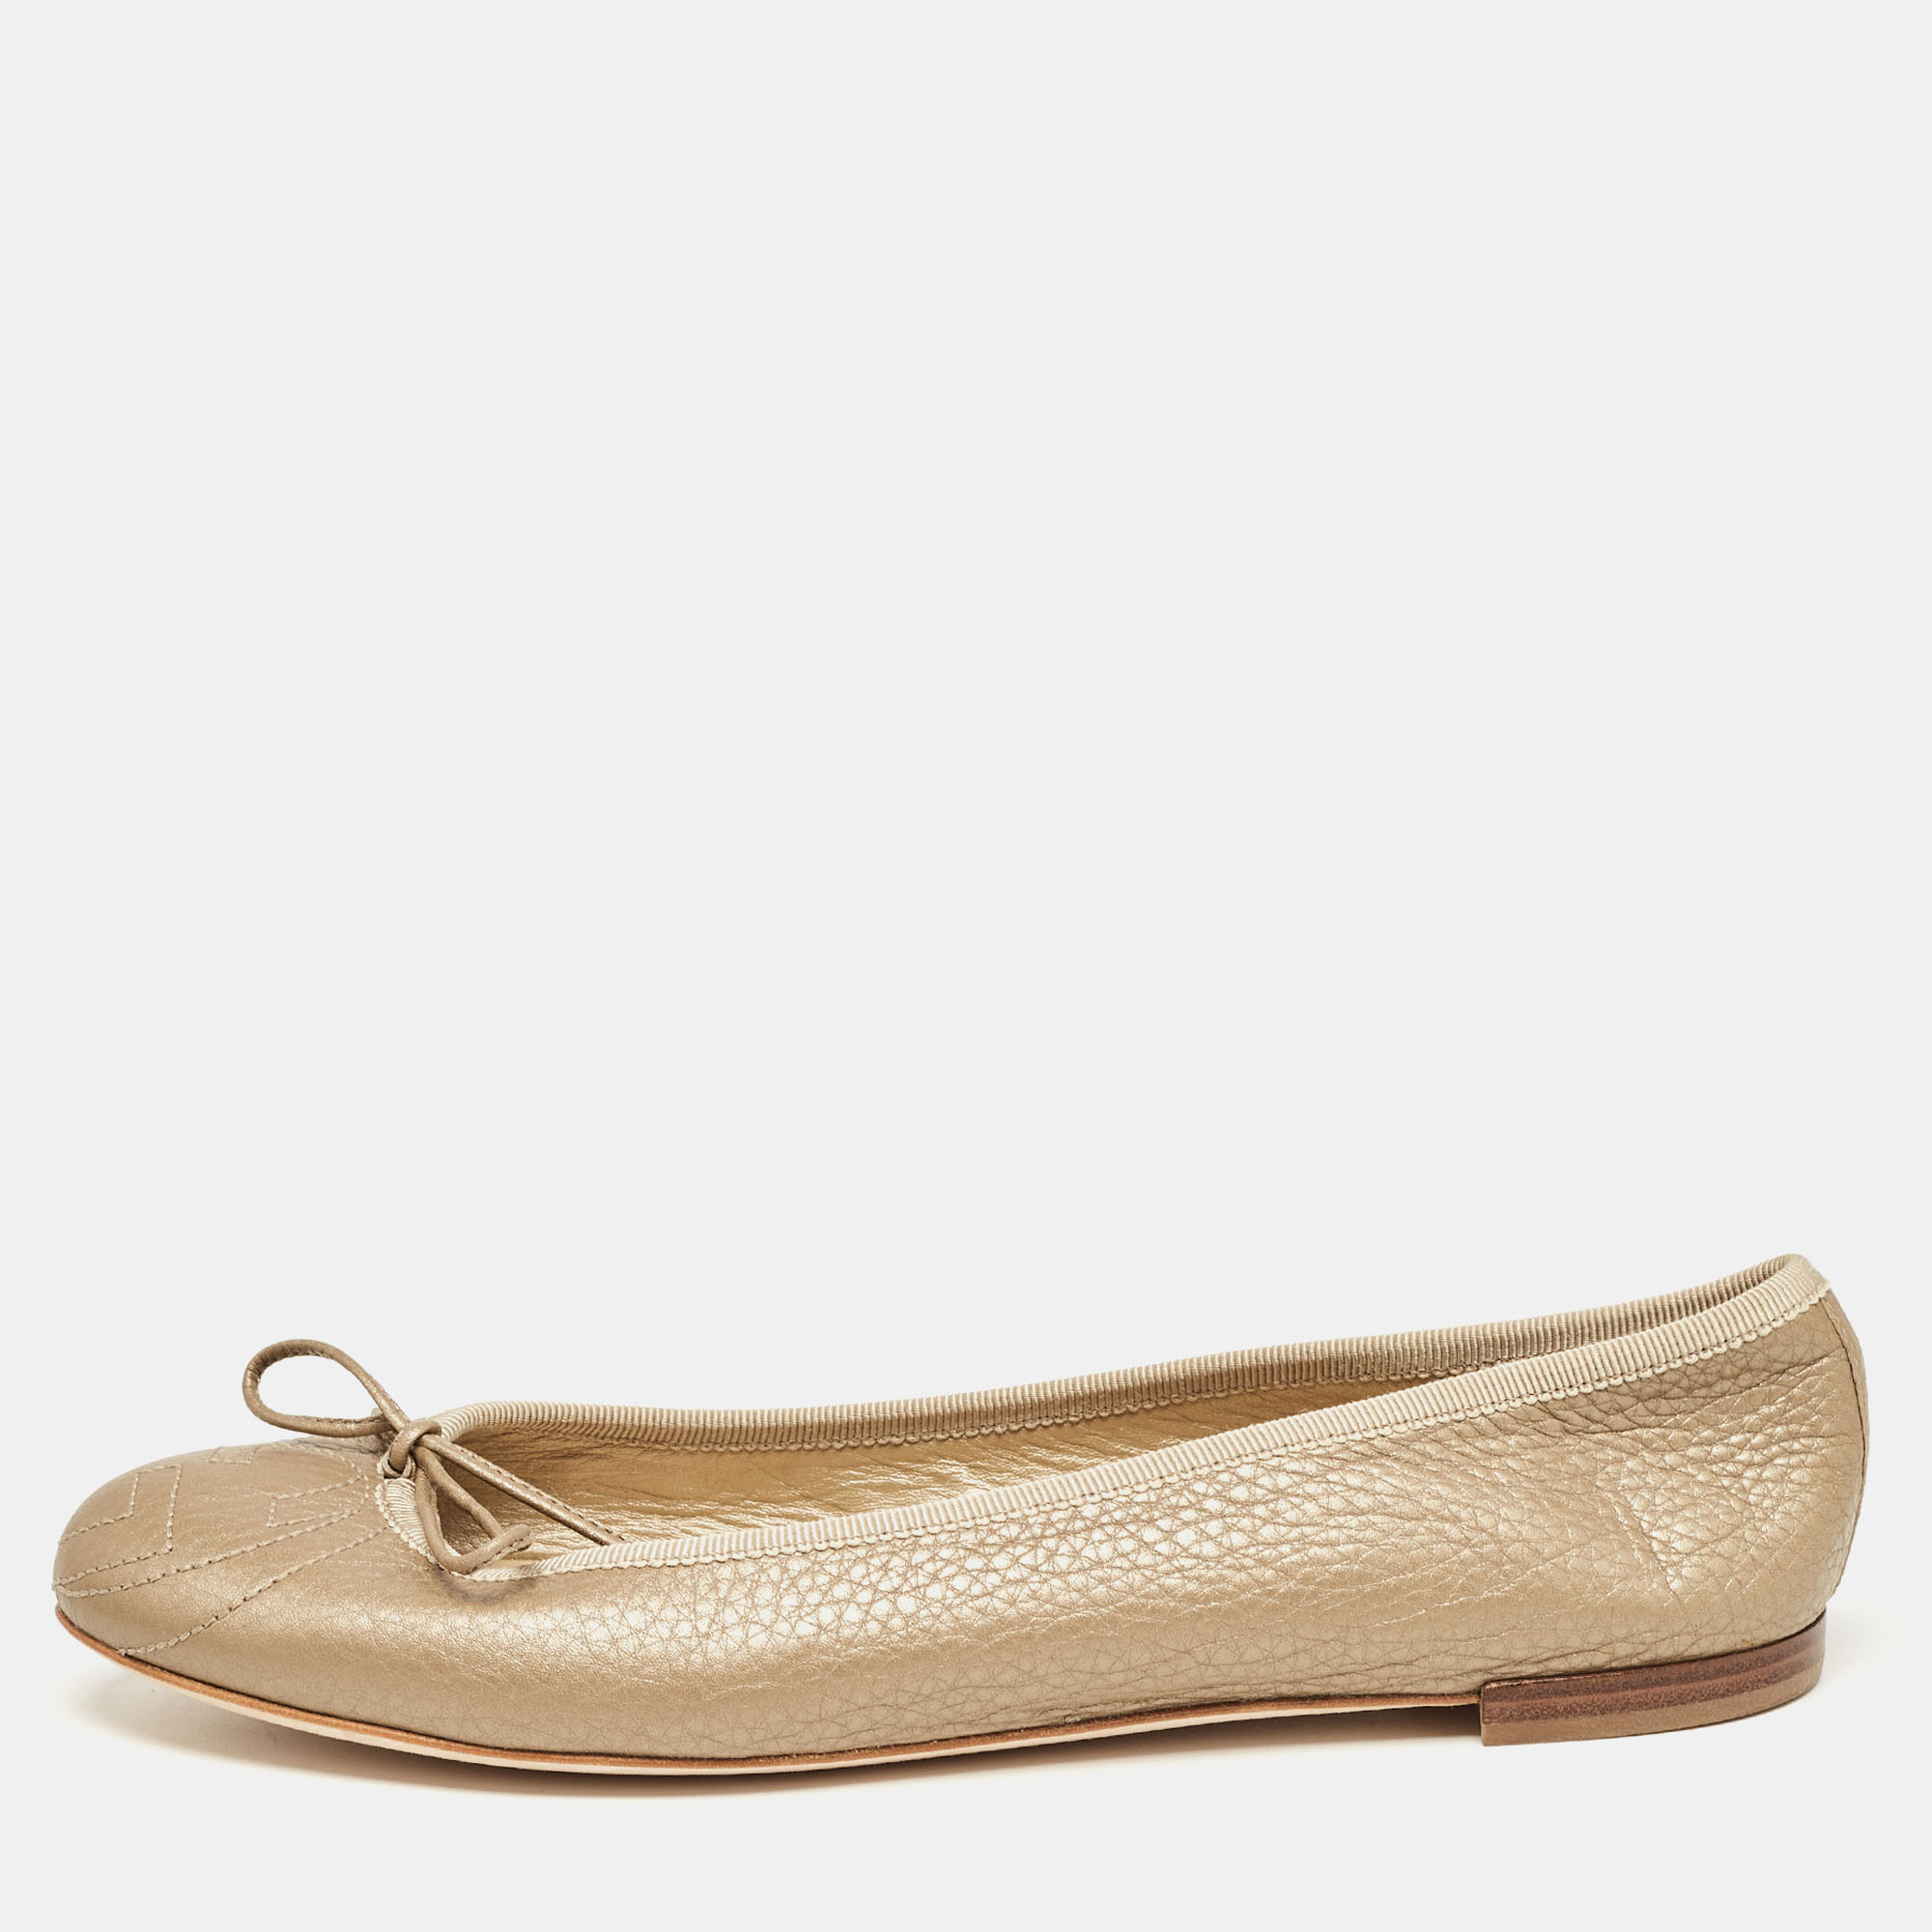 Pre-owned Gucci Gold Leather Interlocking G Detail Ballet Flats Size 38.5